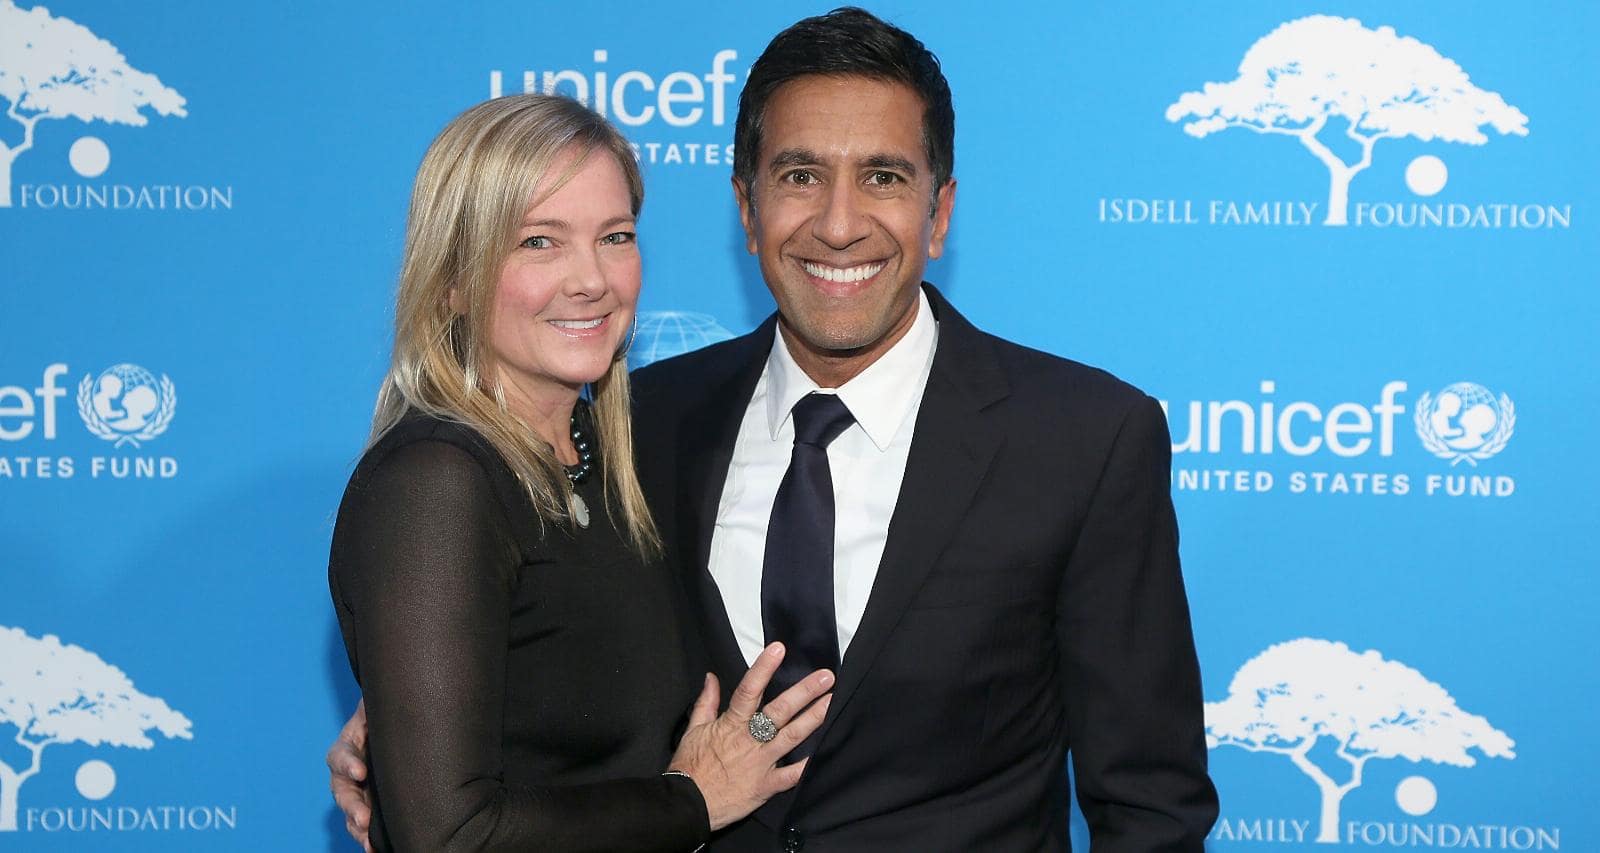 Dr. Sanjay Gupta The Most Famous Doctor in the World Marks 20 Years at